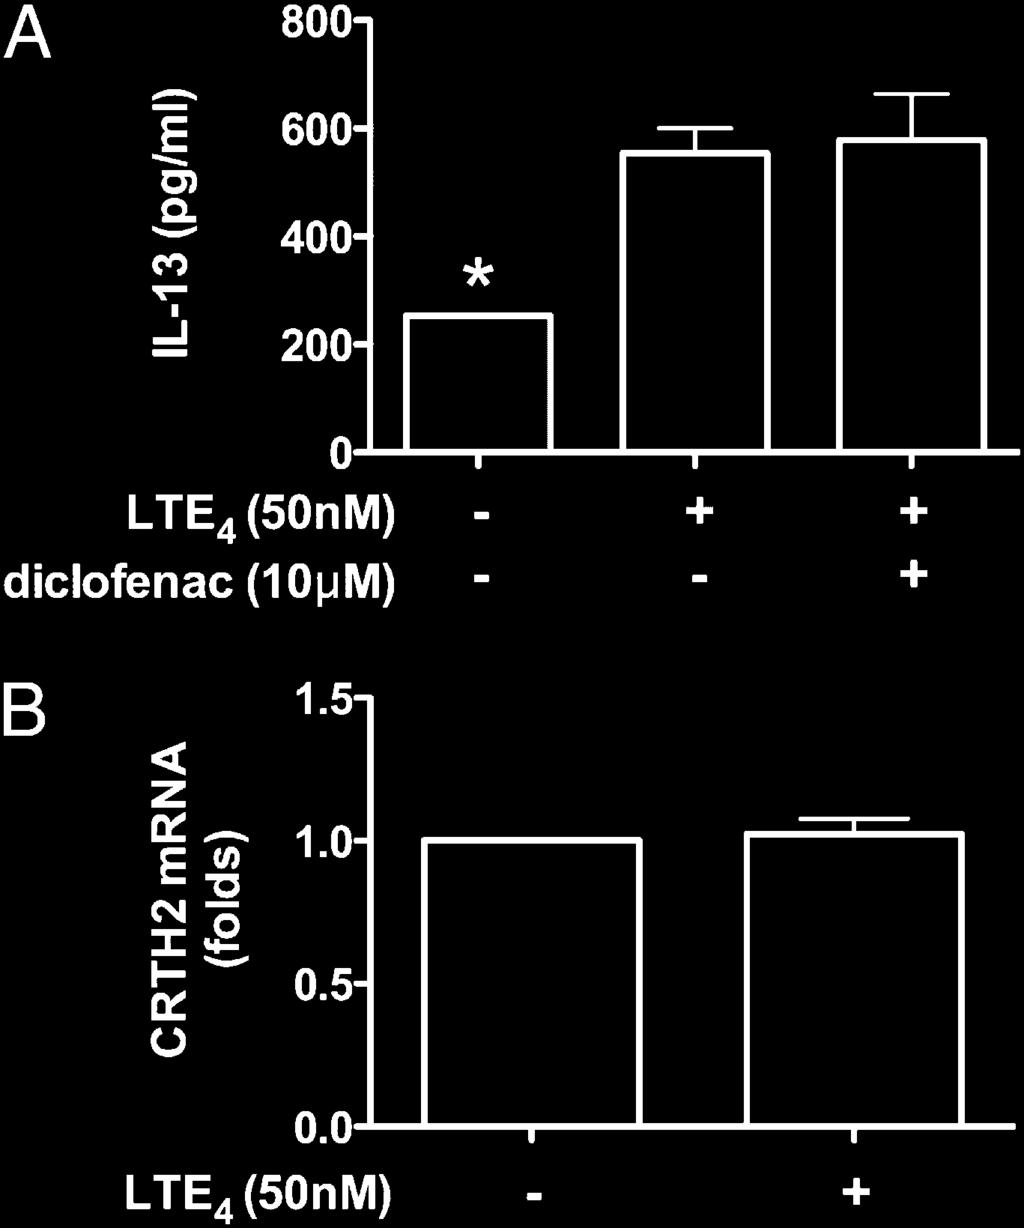 698 PROINFLAMMATORY EFFECTS OF LTE 4 ON Th2 CELLS sured by qpcr after different treatments of the cells for 2.5 h (Fig. 2D).